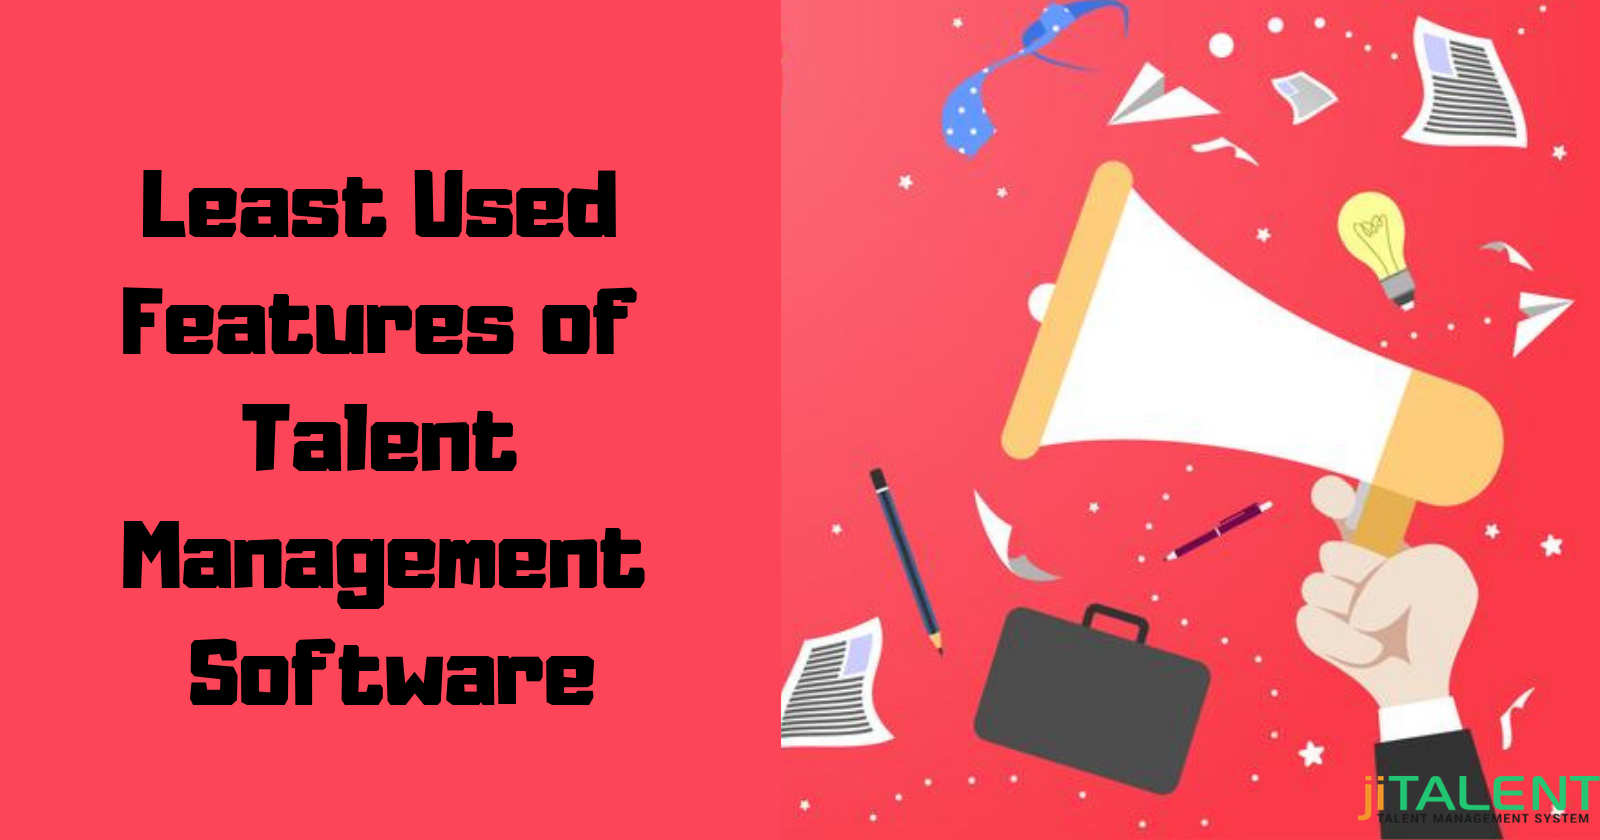 Least Used Features of Talent Management Software